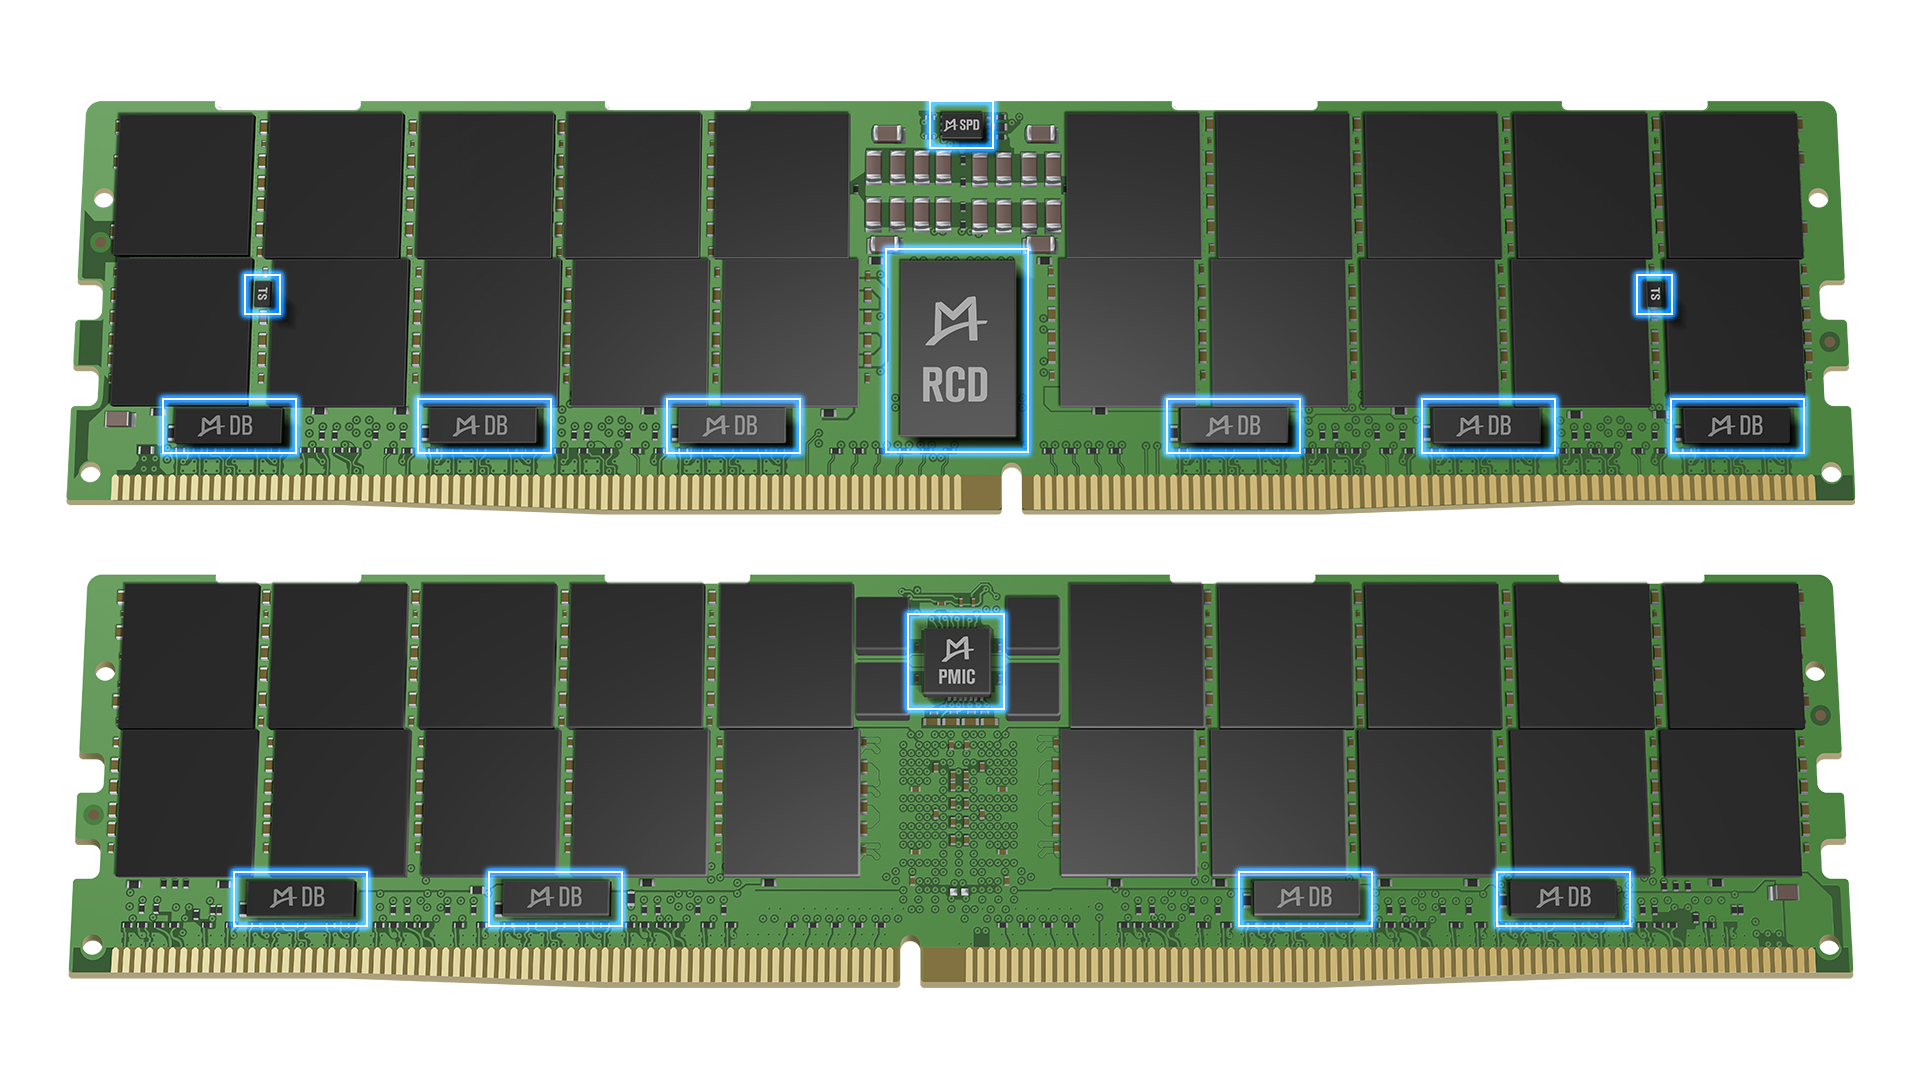 DDR5 products